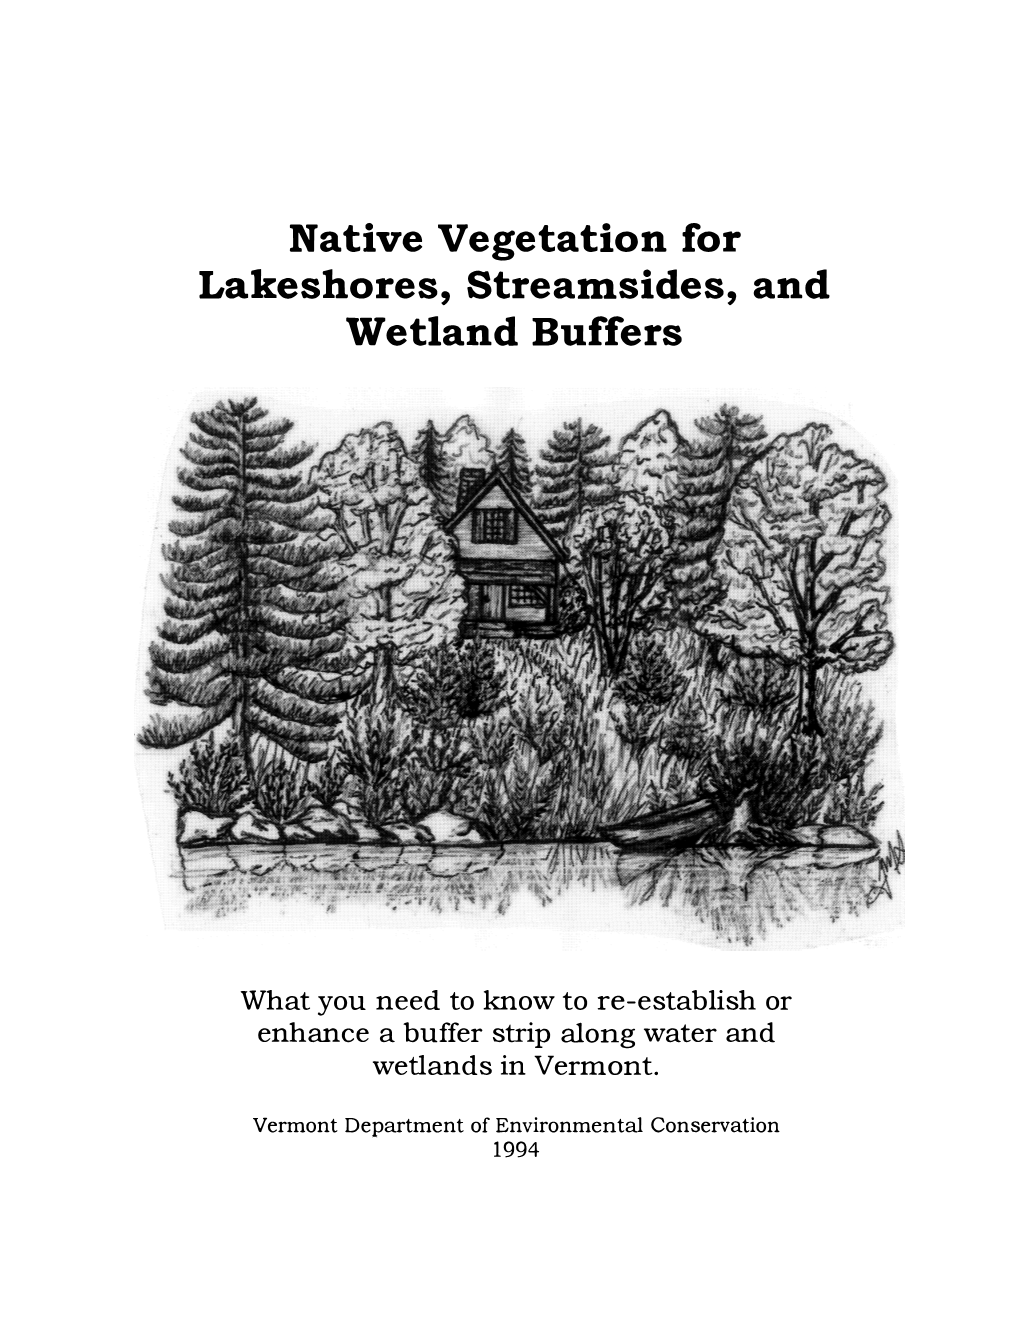 Native Vegetation for Lakeshores, Stream.Sides, and Wetland Buffers